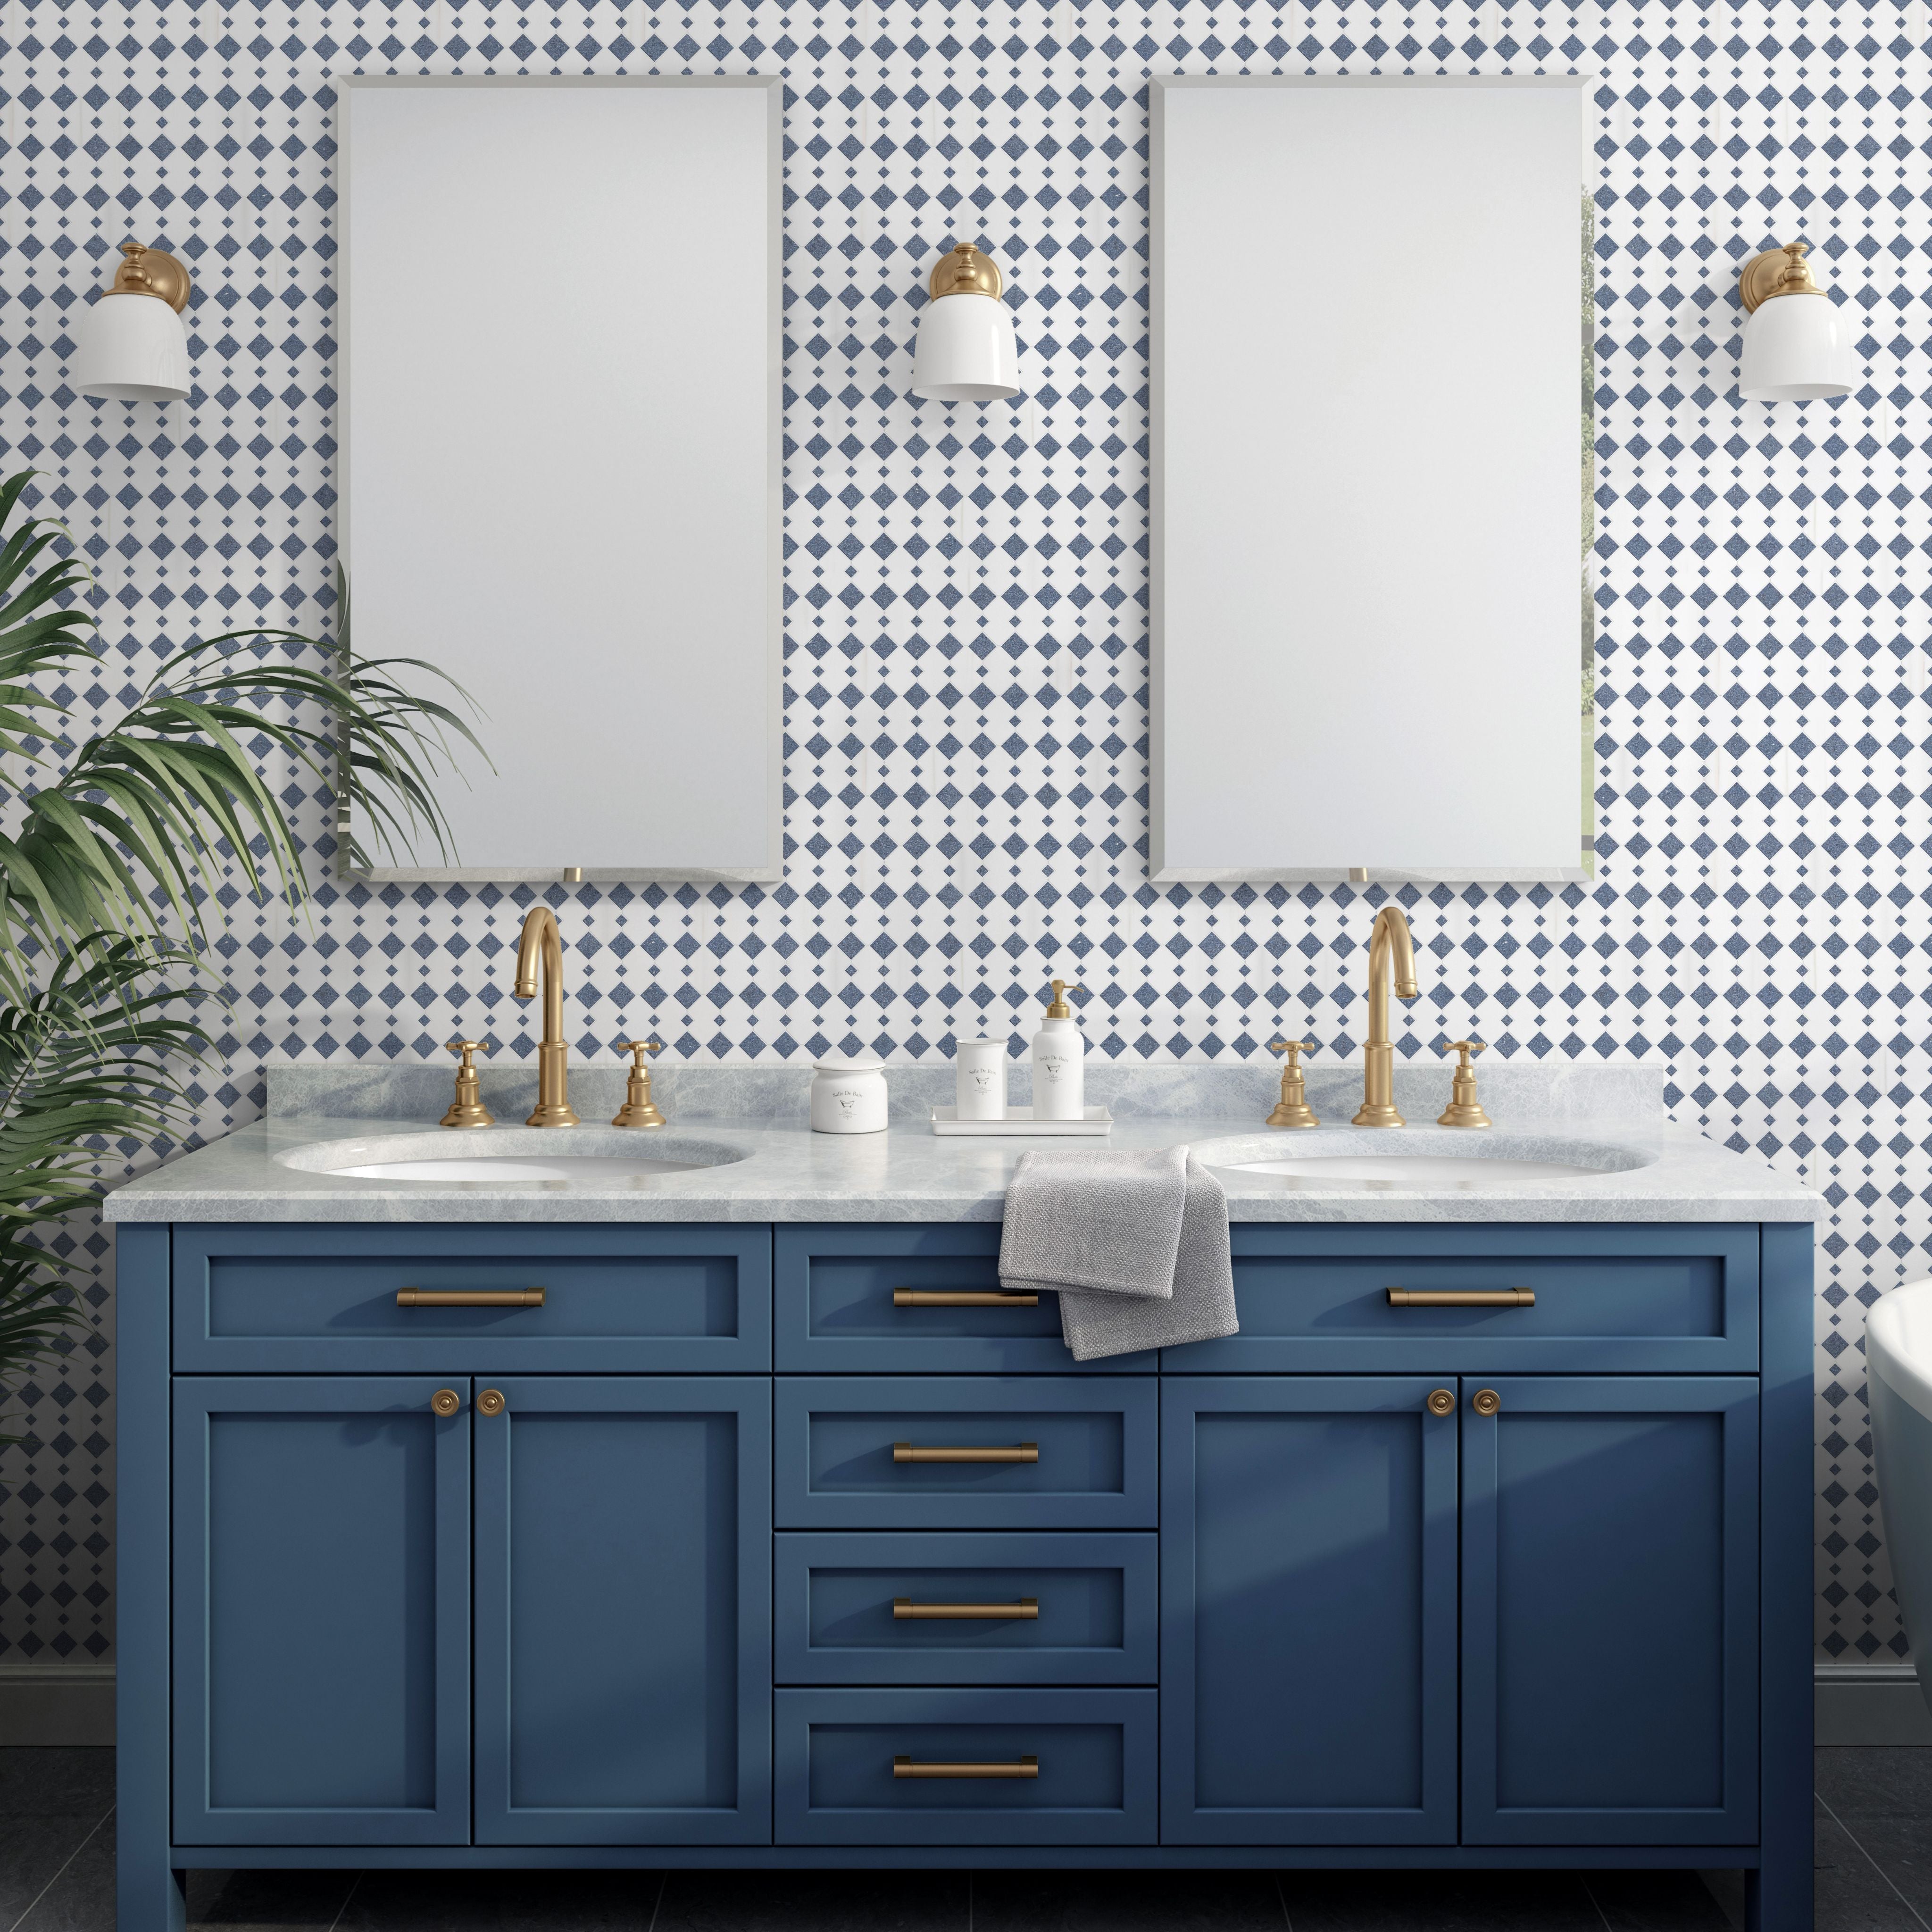 dulcet tassel blue 1mtsldol natural stone mosaic interior 1 made by dulcet and sold by surface group international